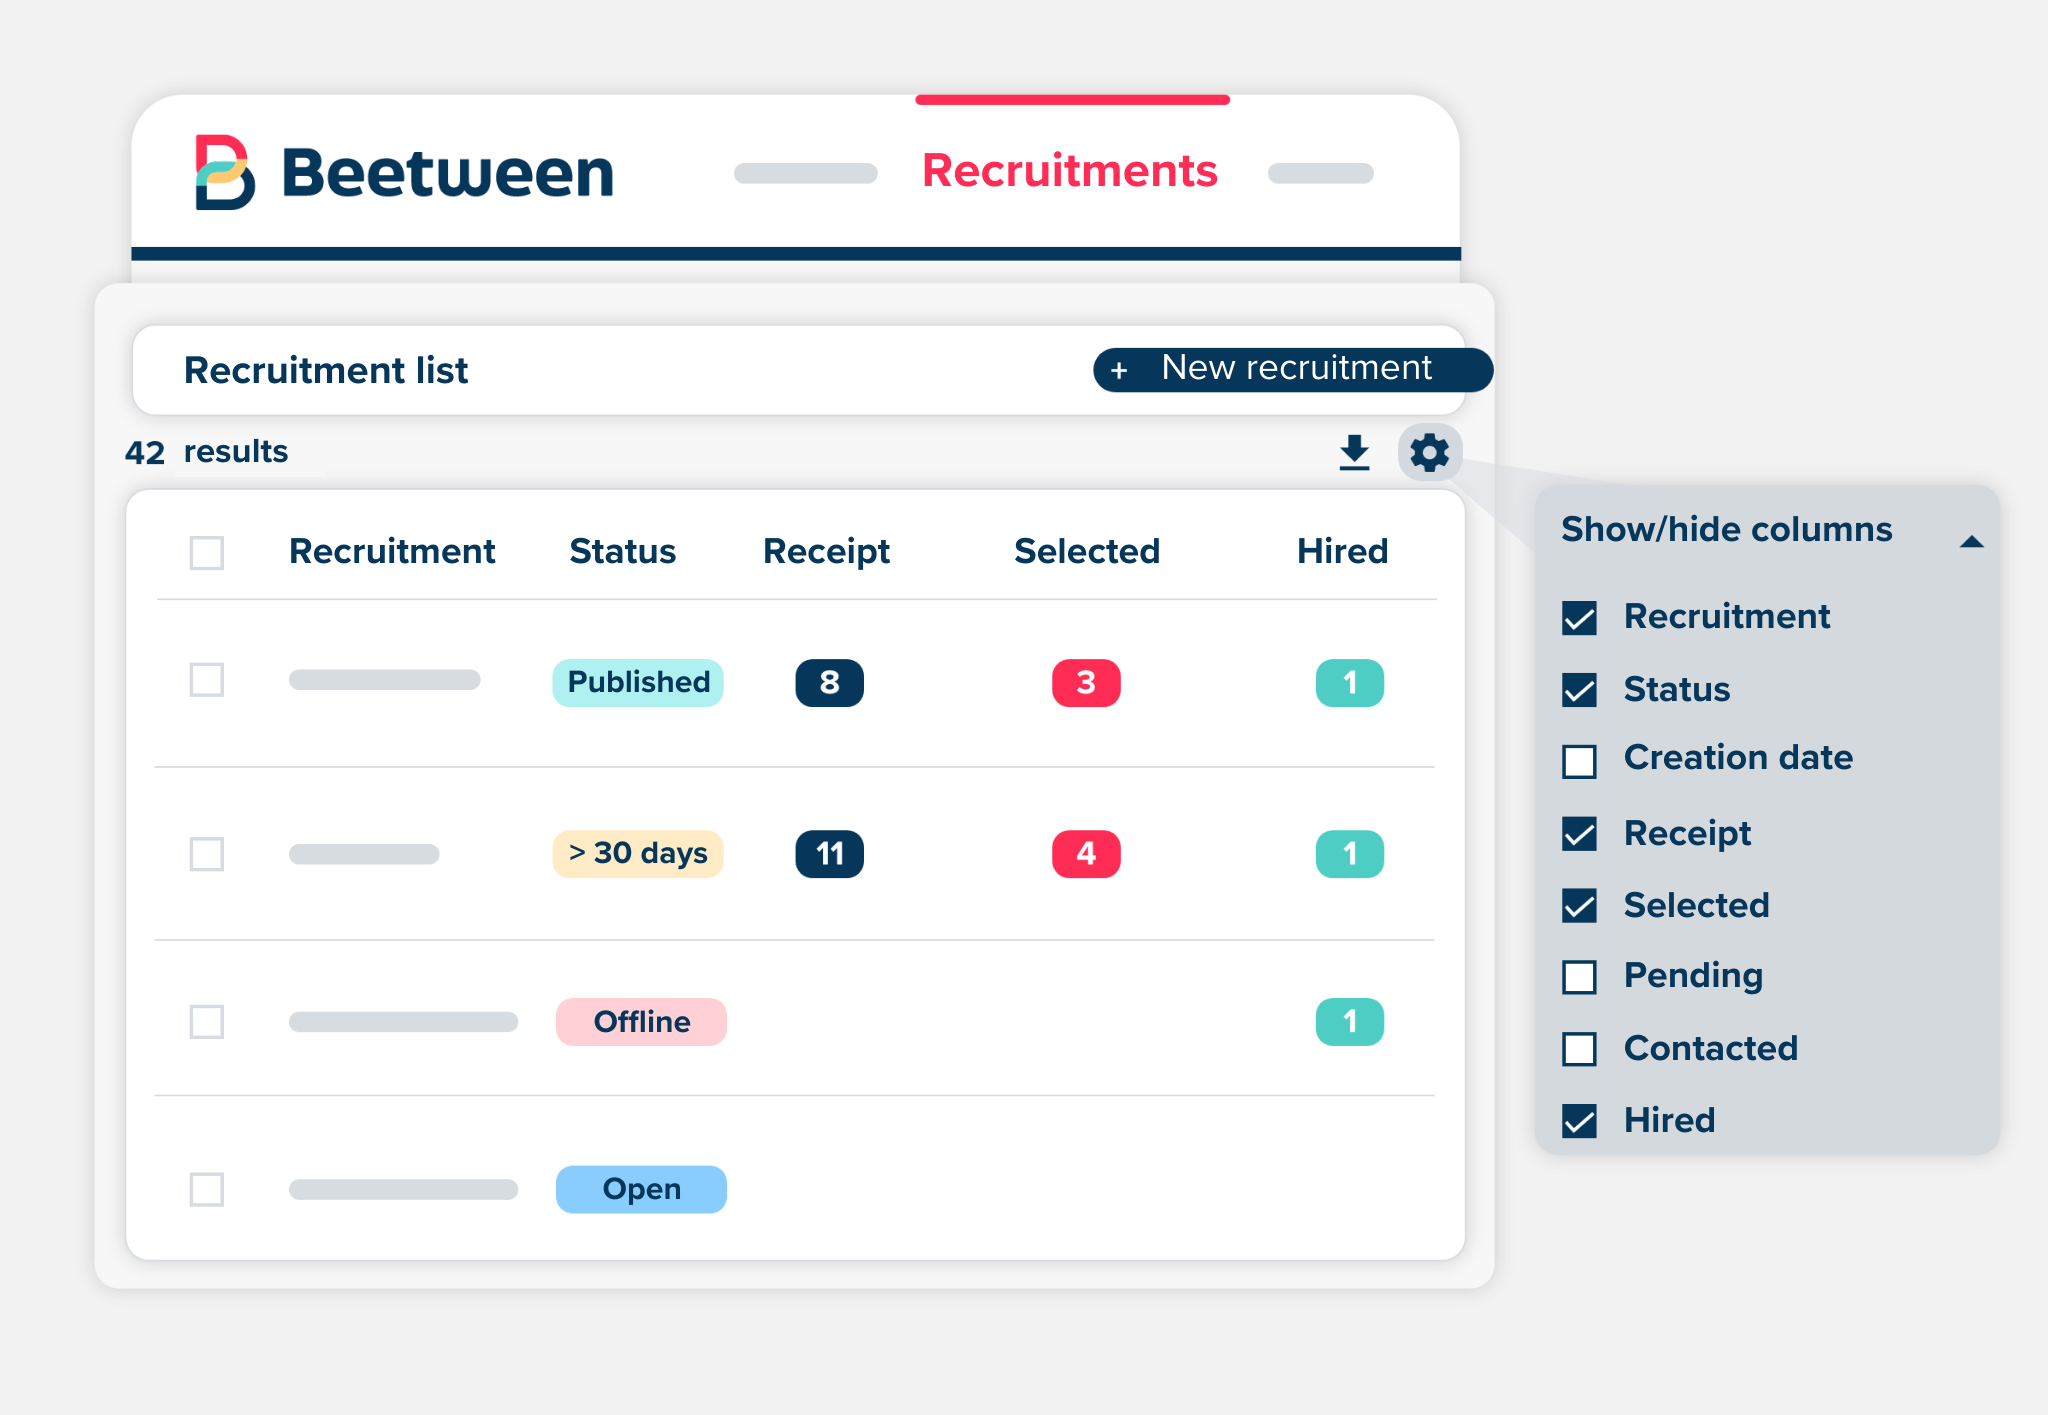 Beetween - Track all your job offers in one place